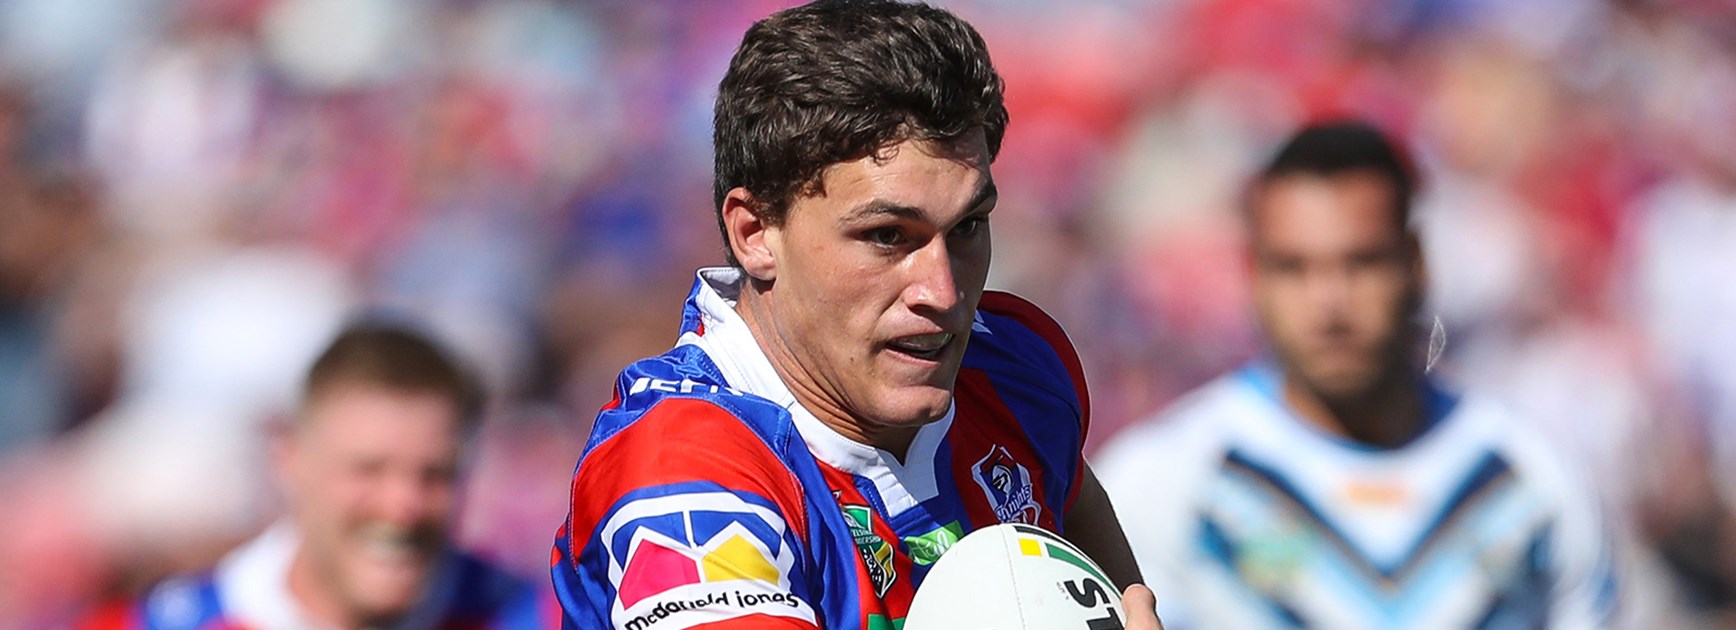 Newcastle Knights forward Sam Stone has re-signed with the club through to the end of 2020.